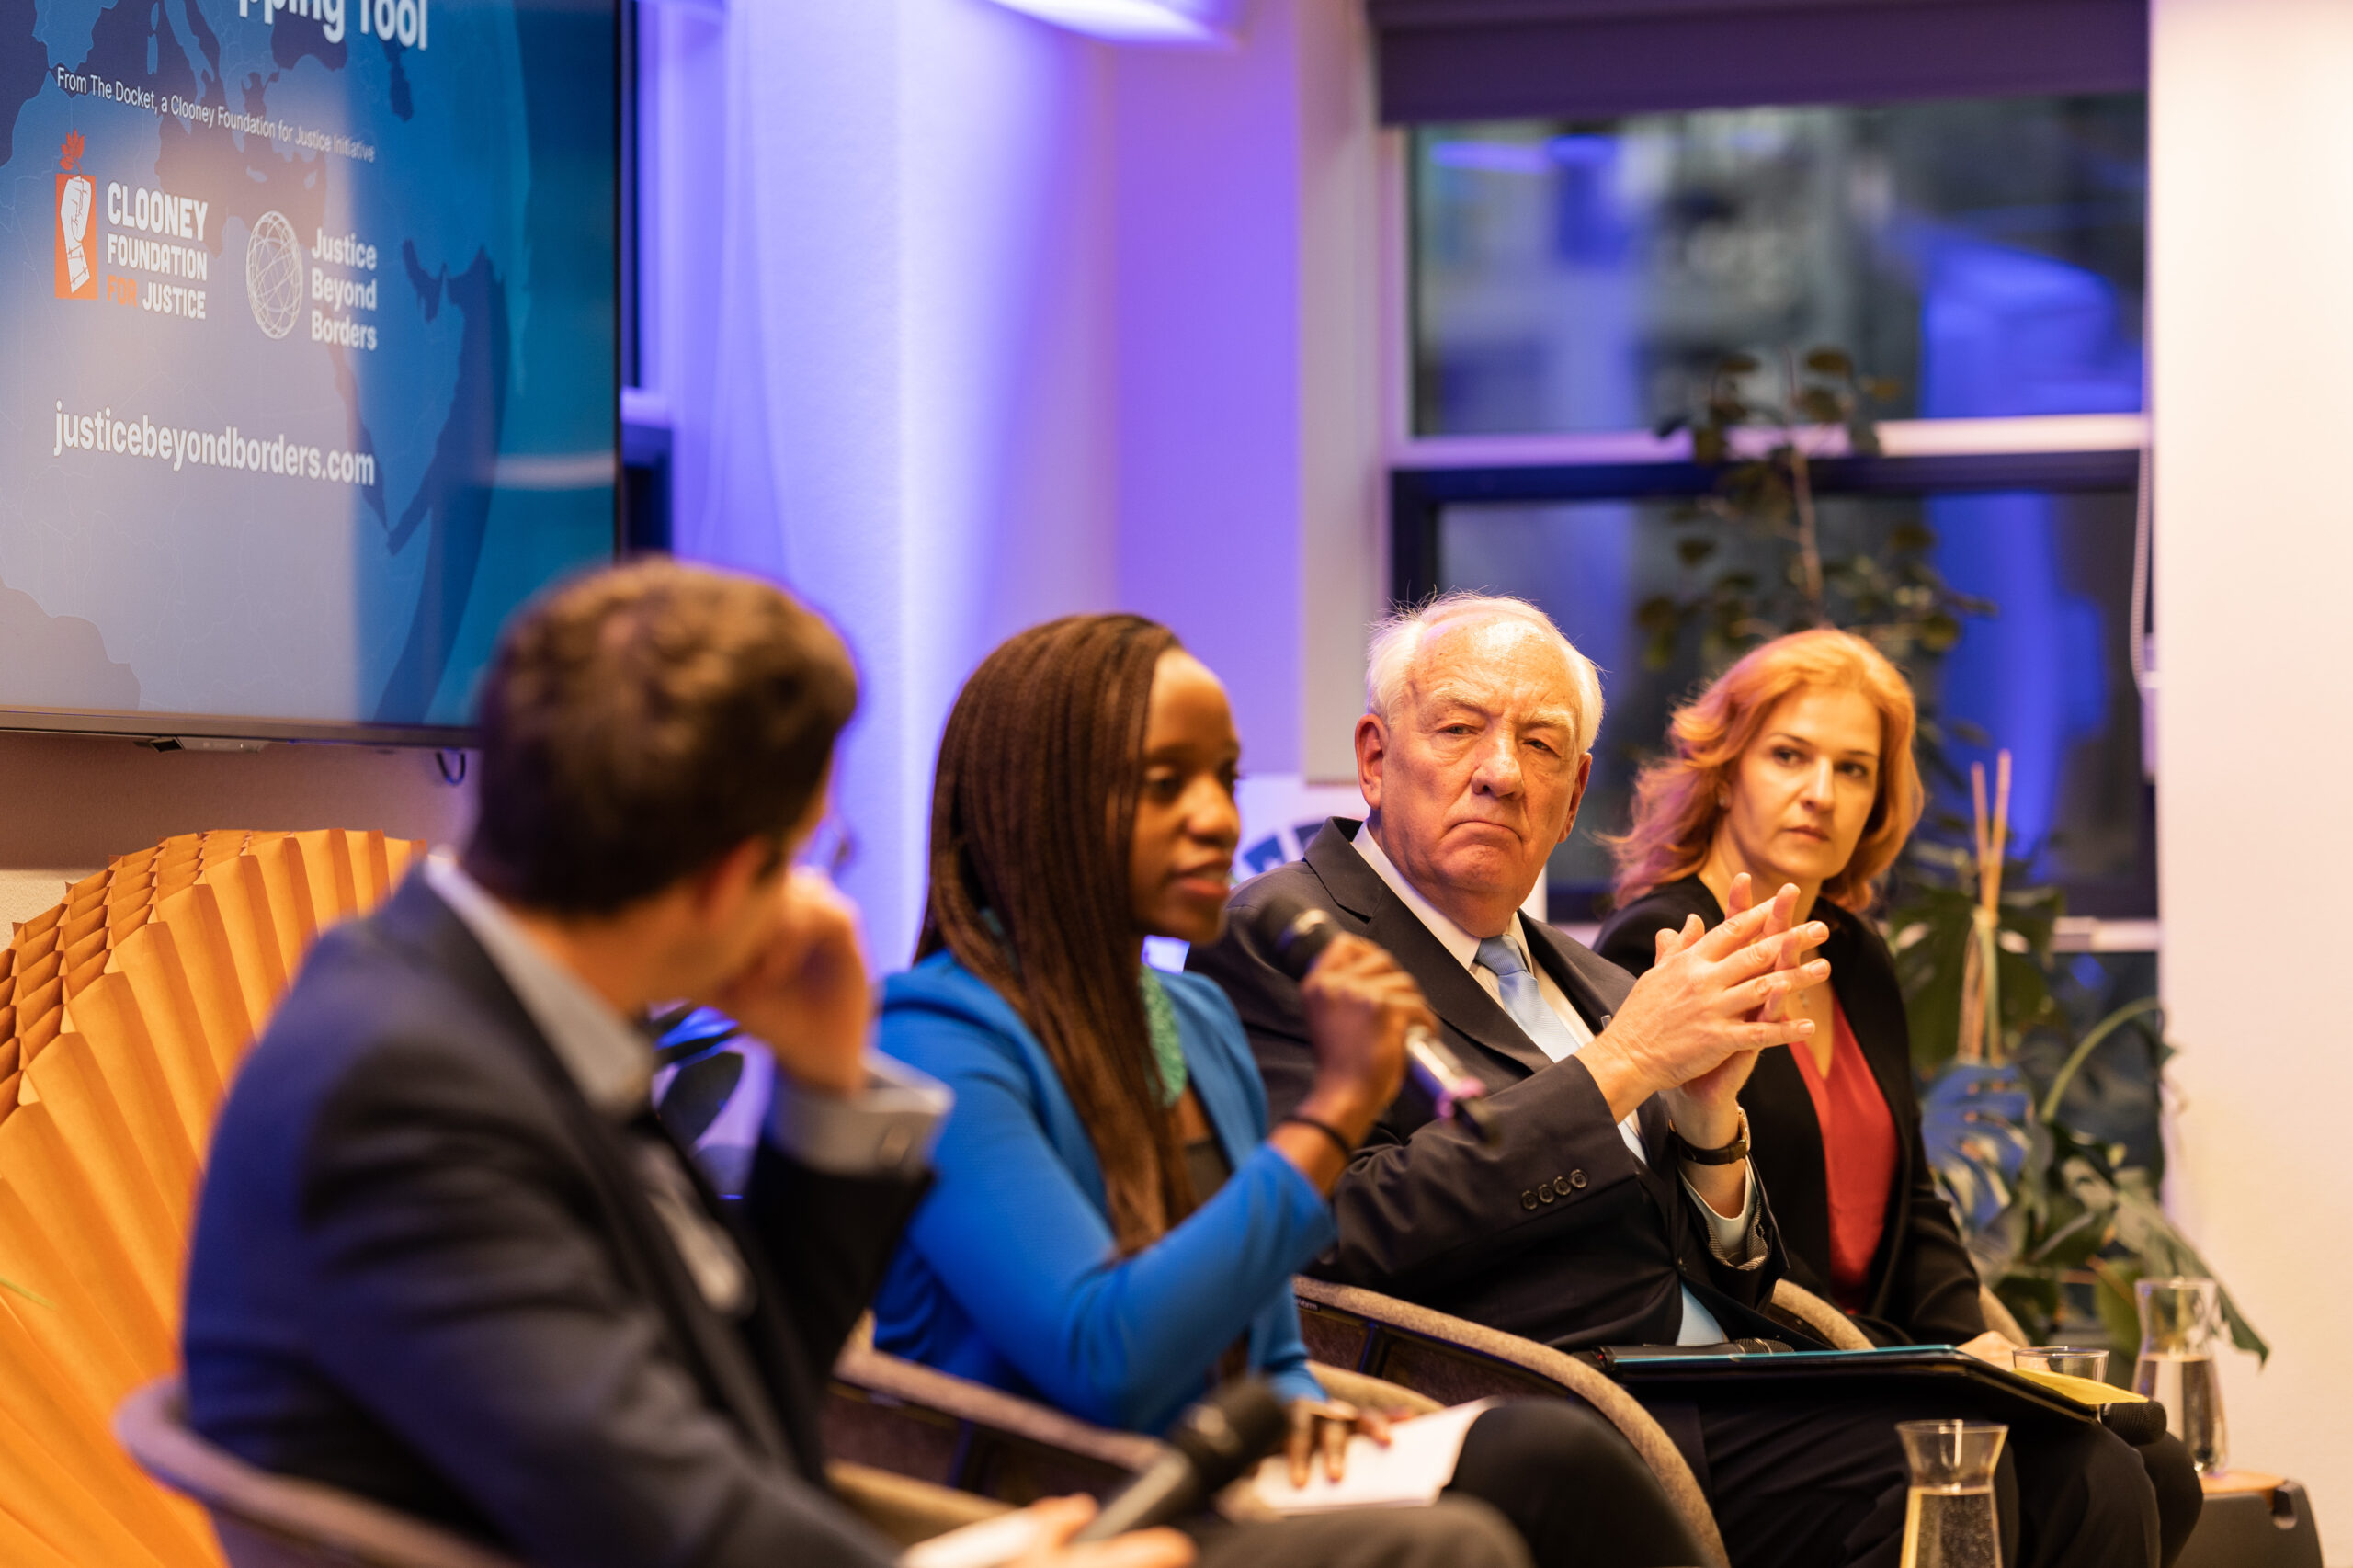 The panel of experts speak at the launch of the Clooney Foundation for Justice's Justice Beyond Borders program